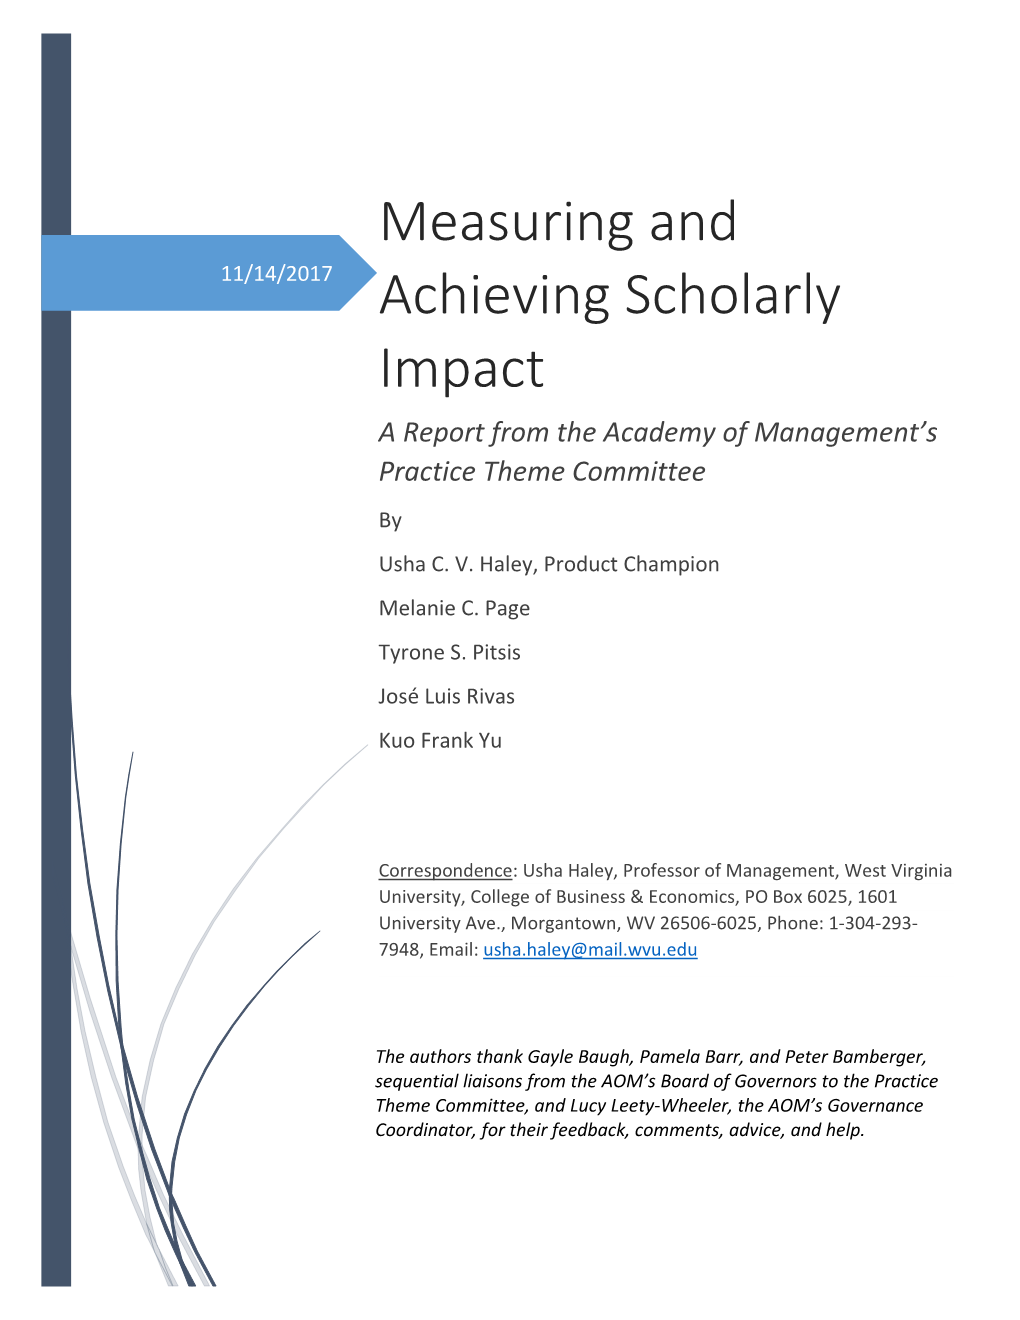 Measuring and Achieving Scholarly Impact